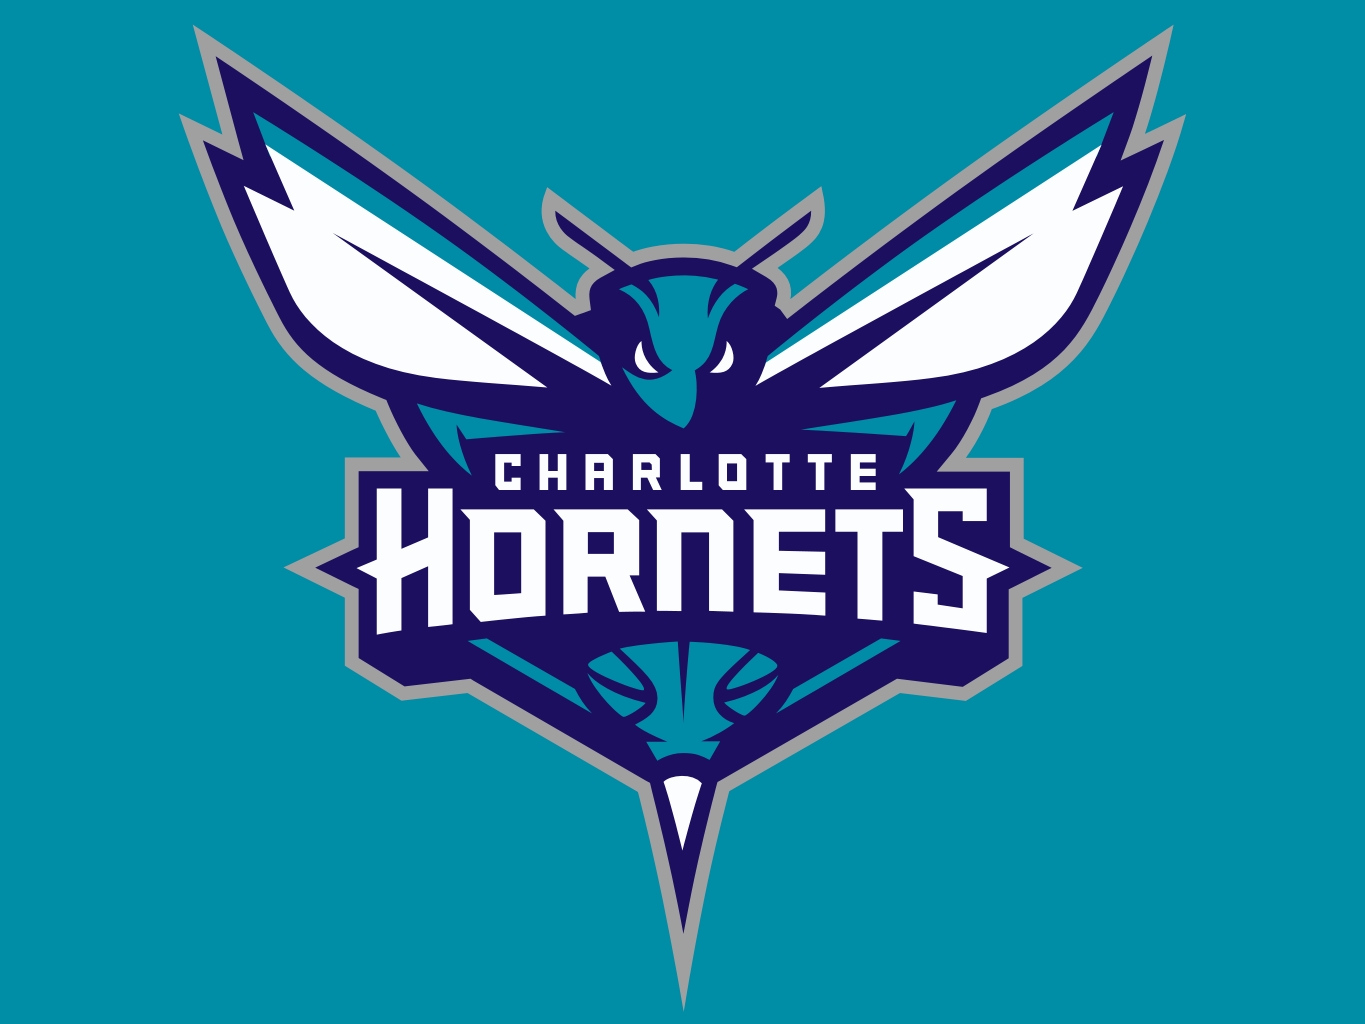 Charlotte Hornets Nail Decals - wide 9